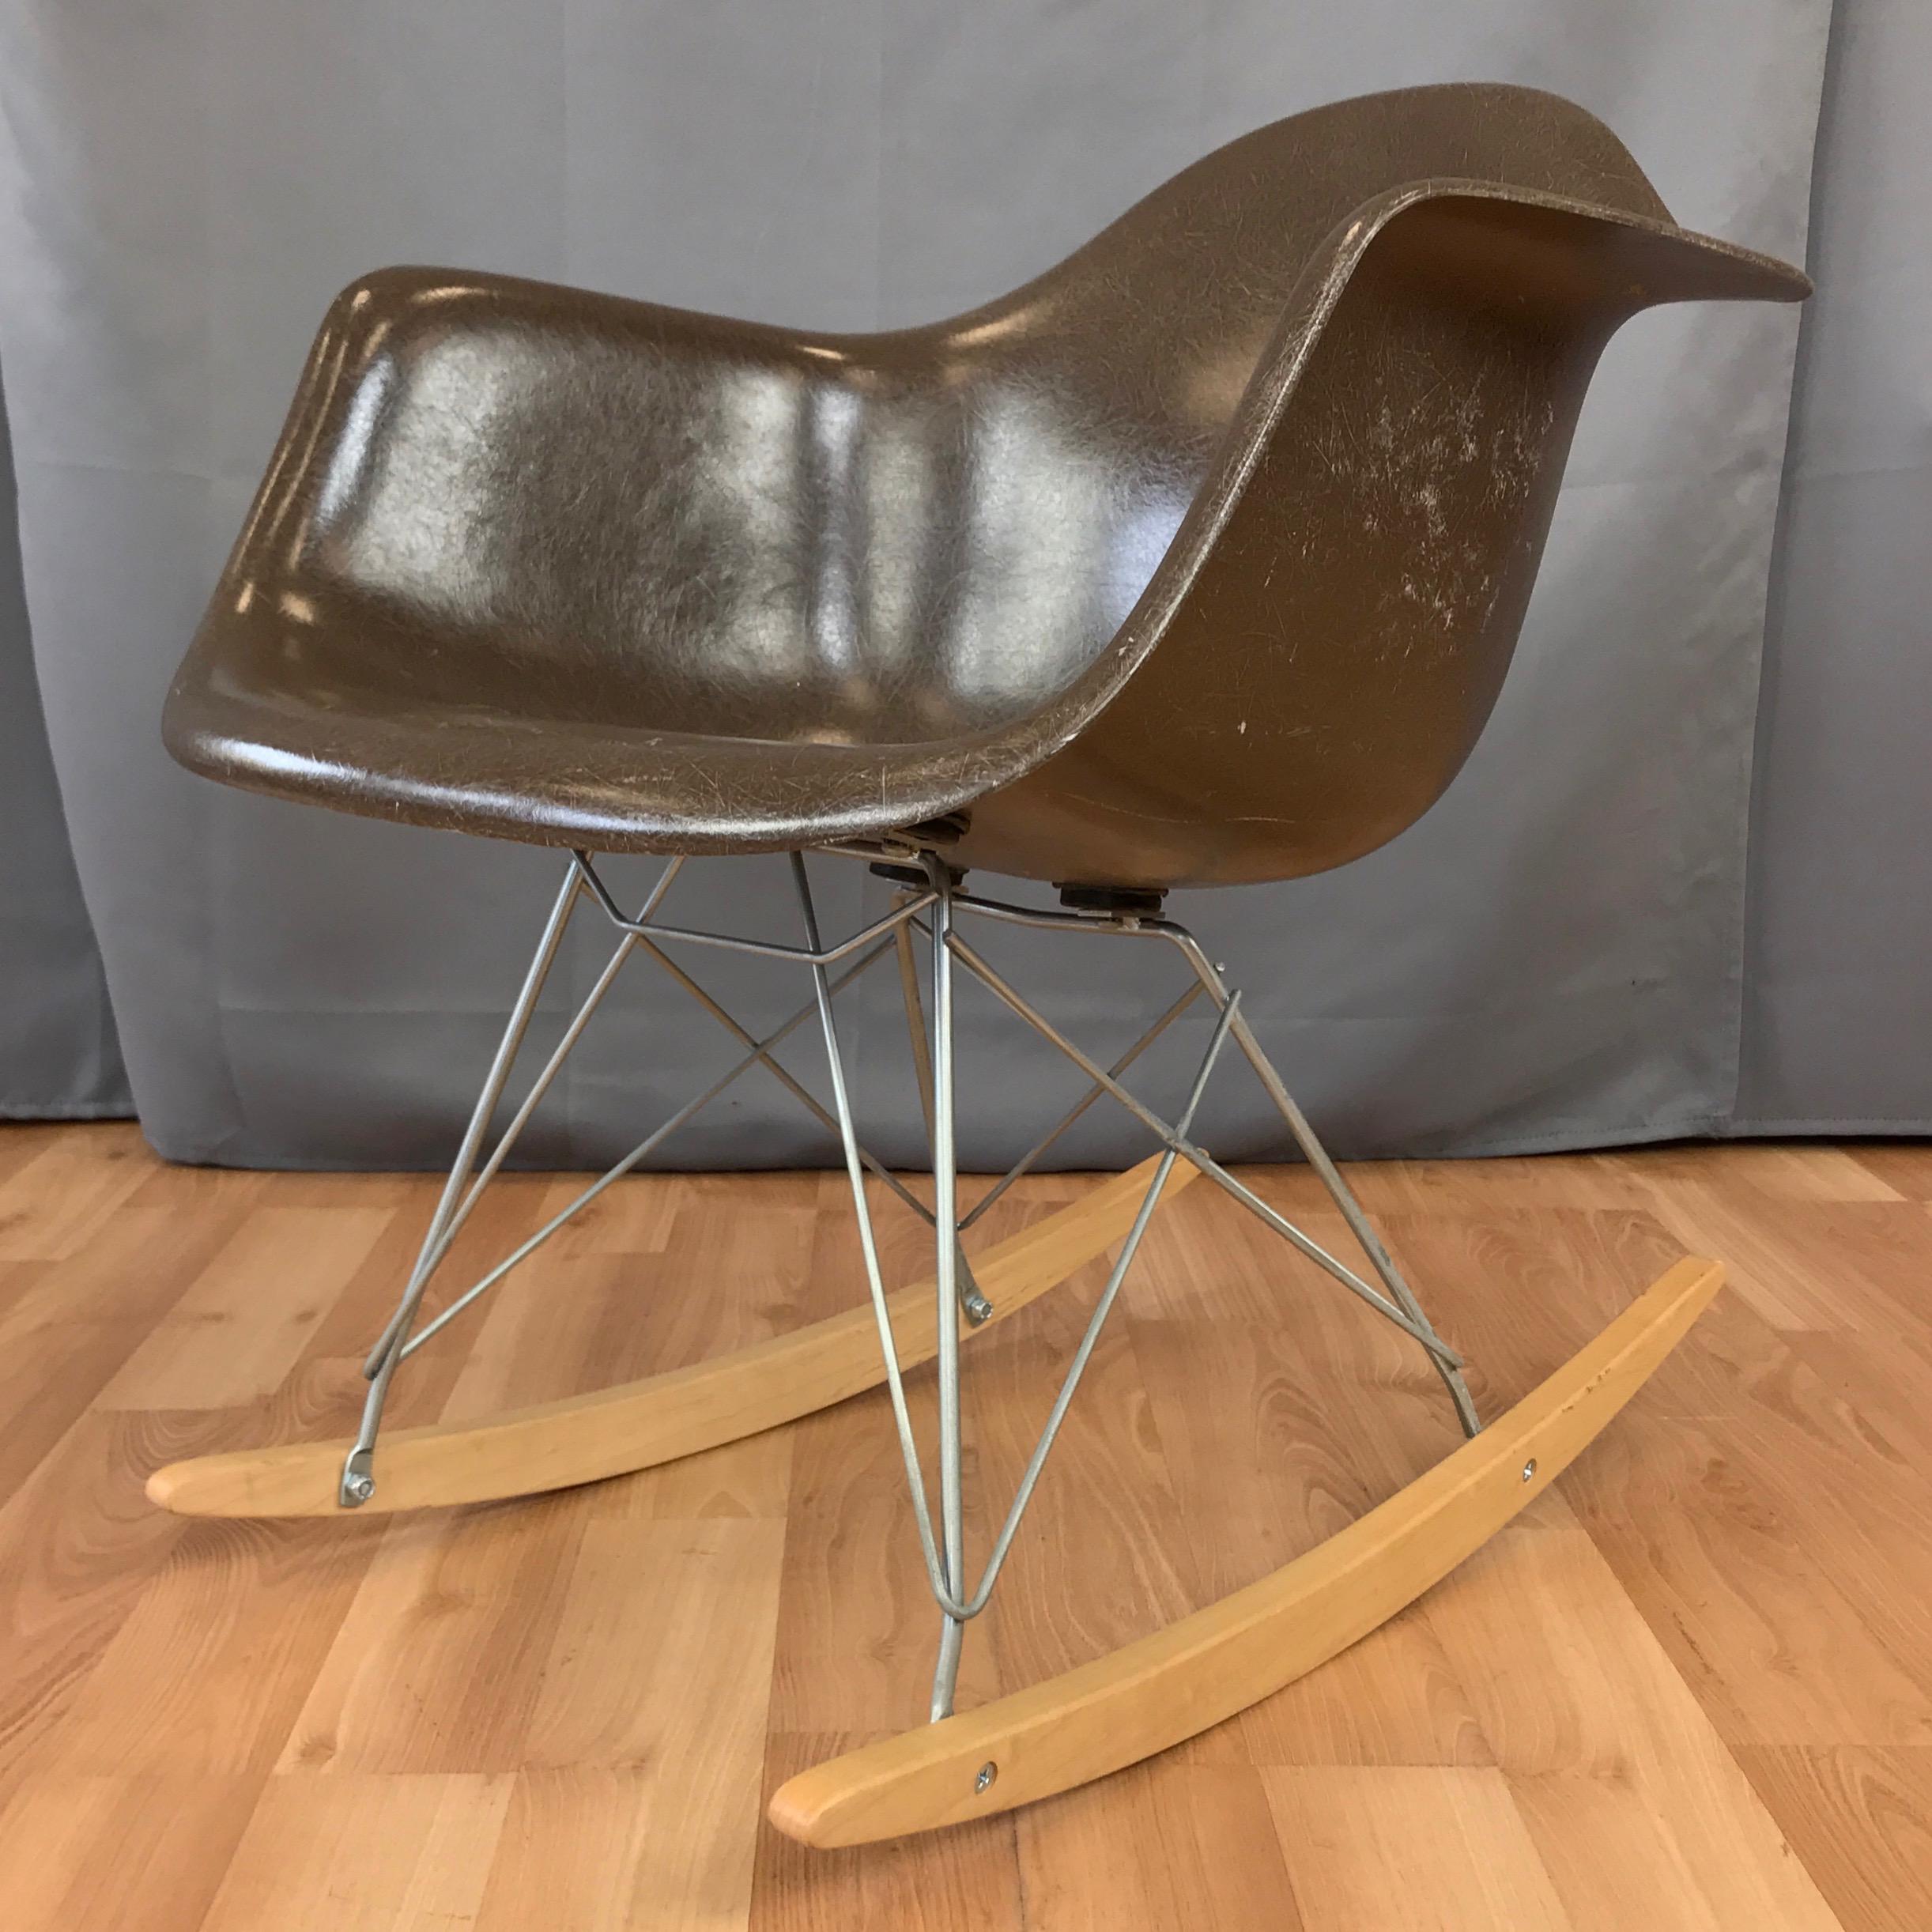 A RAR rocking chair by Charles & Ray Eames for Herman Miller with 1970s seat and newer base.

Designed in 1948, the RAR rocker was one of the first products in Charles & Ray Eames’ line of fiberglass-reinforced molded plastic shell chairs. This